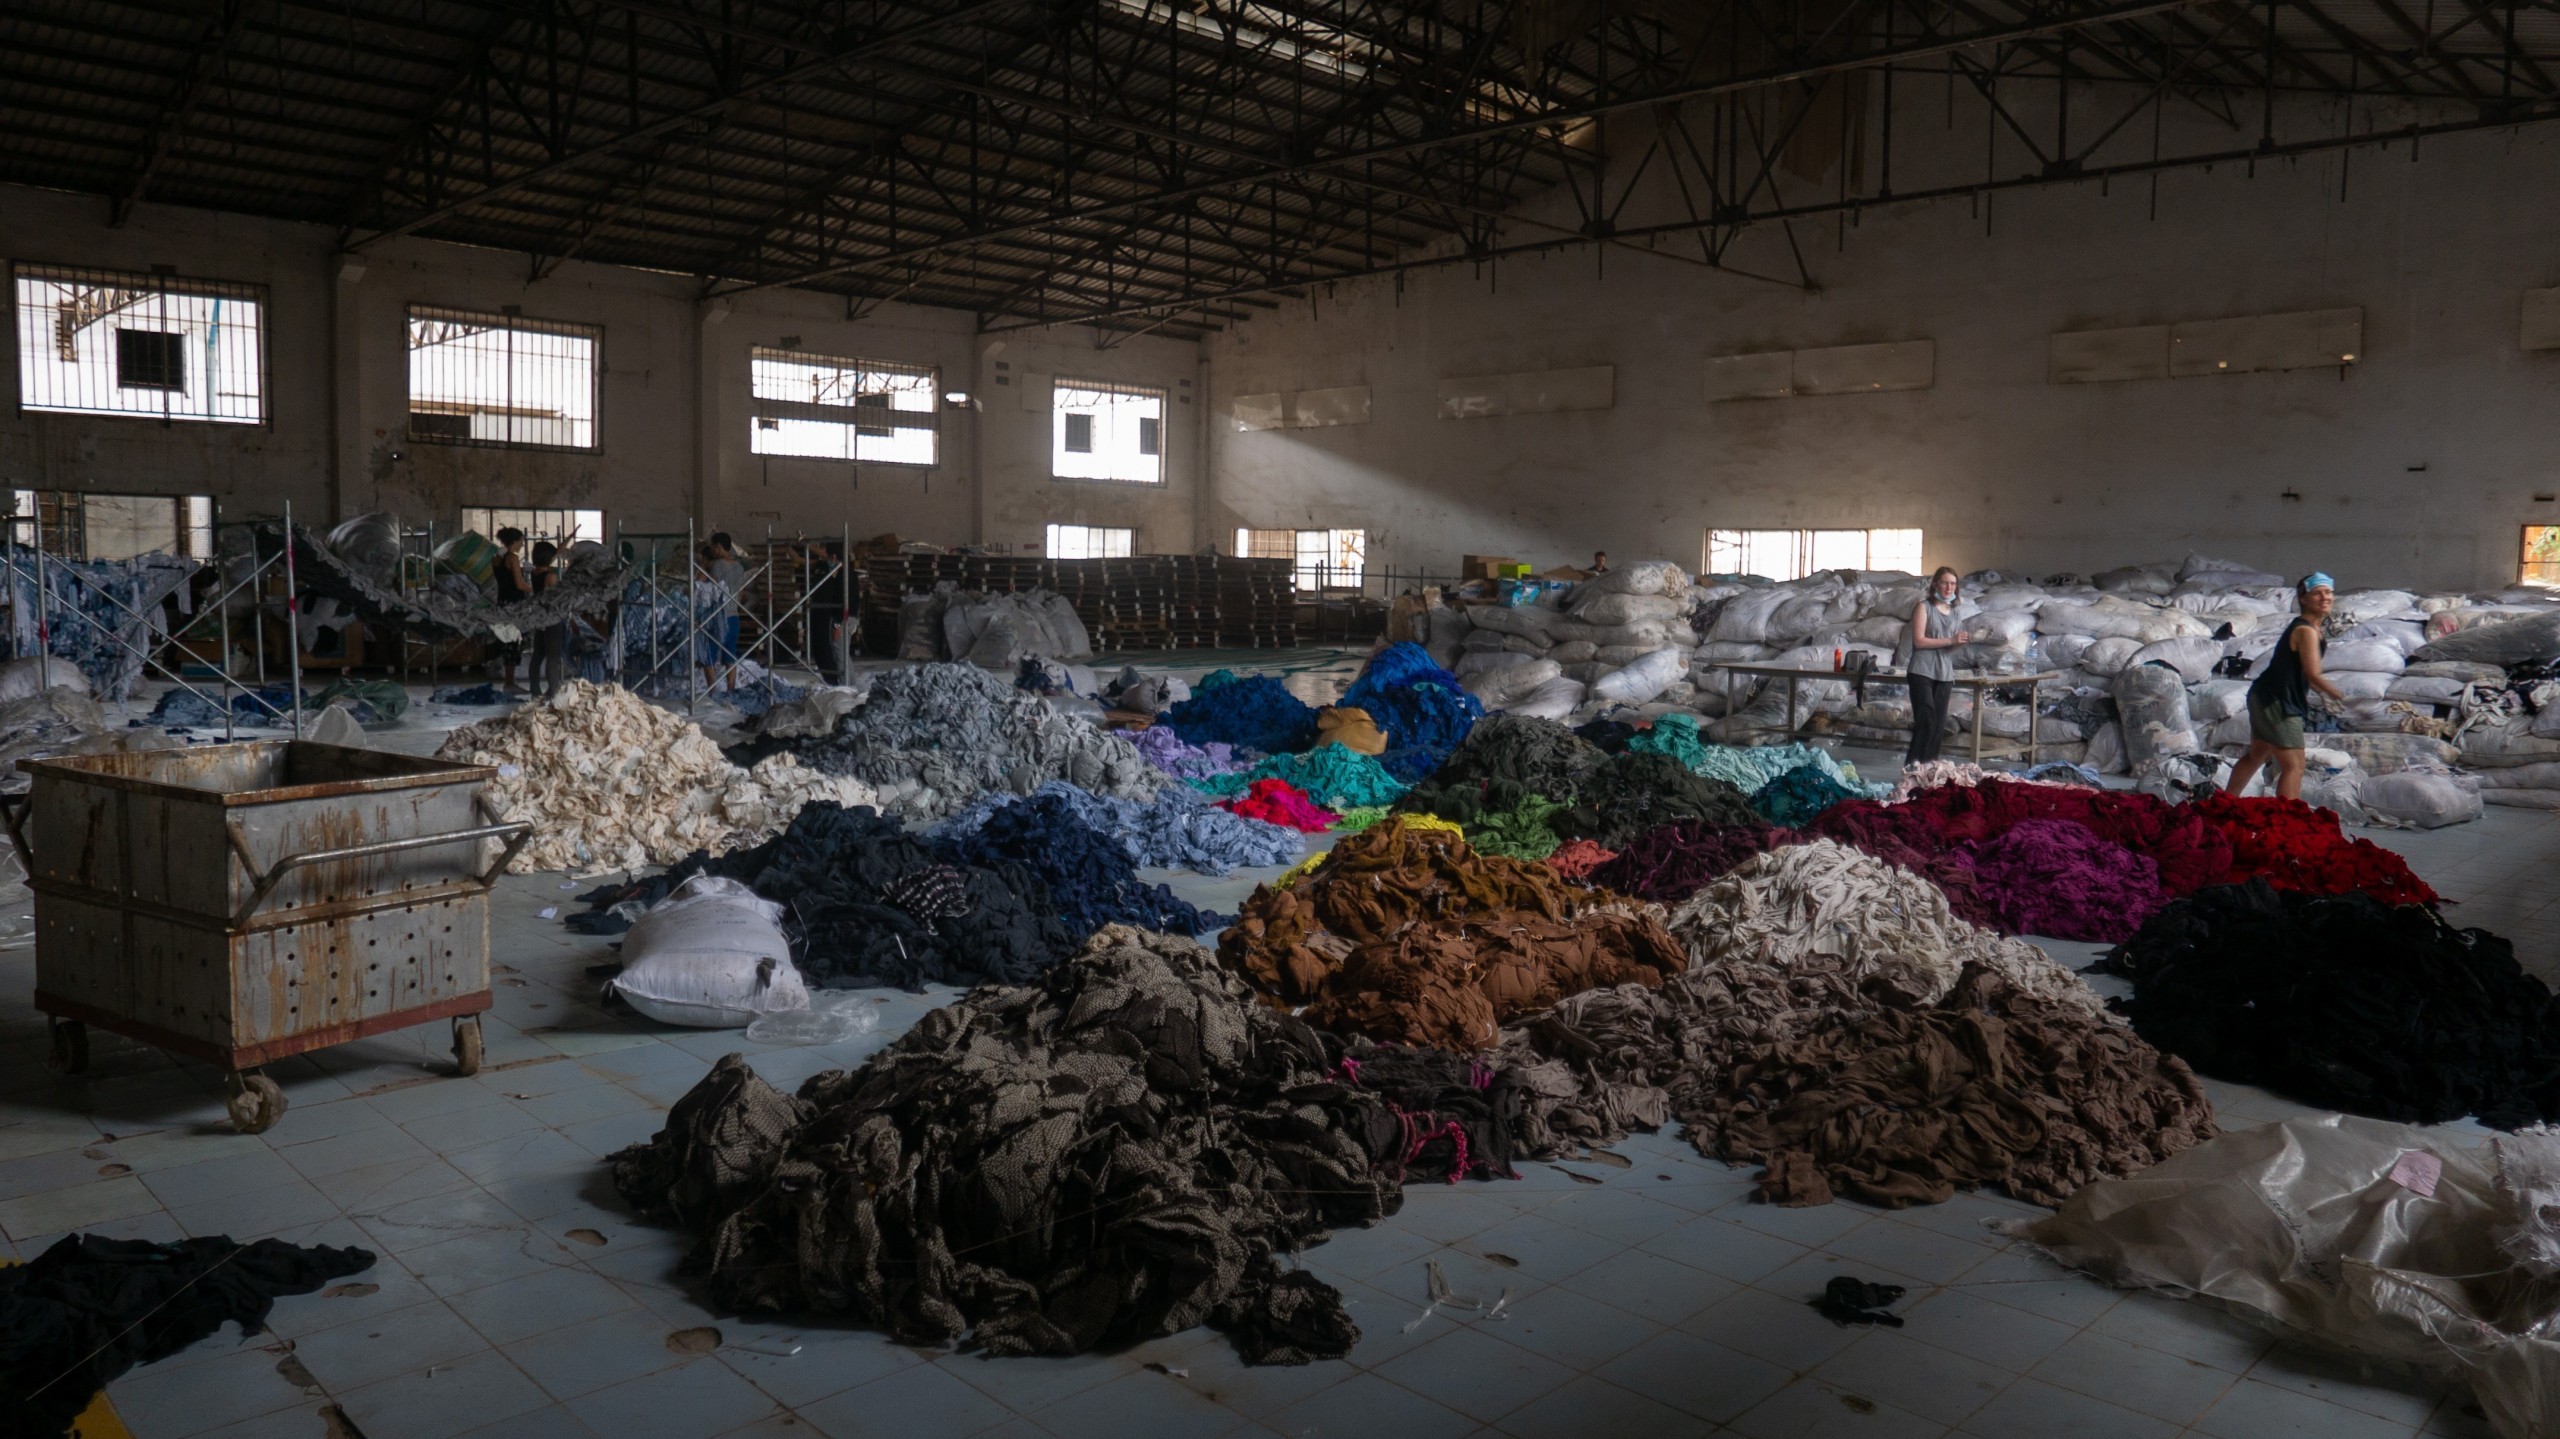 Image of people sorting through clothing in a warehouse